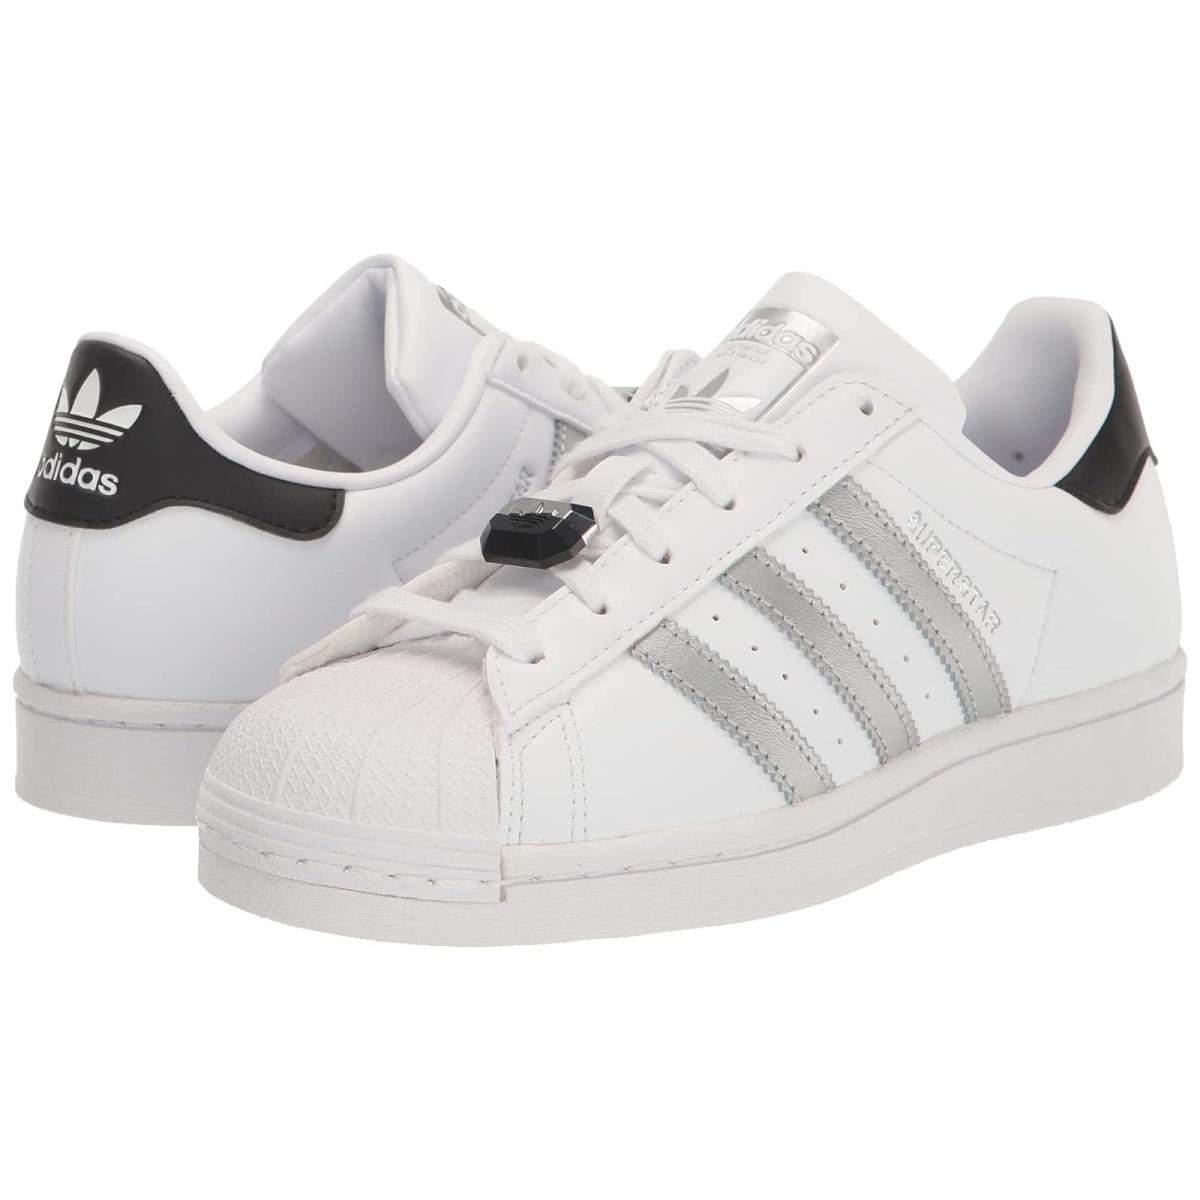 Woman`s Sneakers Athletic Shoes Adidas Originals Superstar White/Silver Metallic/Black